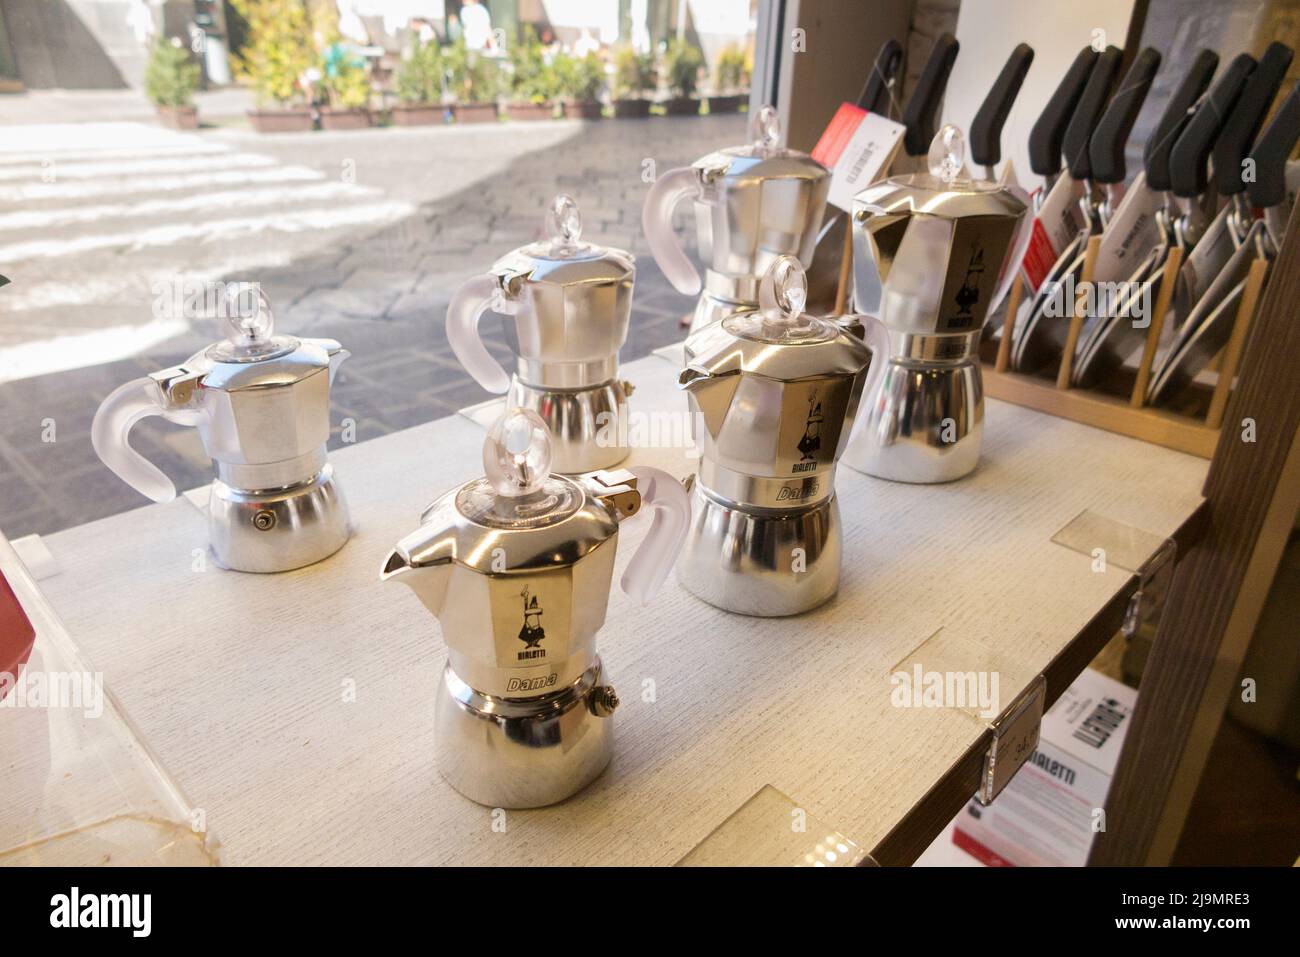 https://c8.alamy.com/comp/2J9MRE3/coffee-pots-and-coffee-makers-on-display-at-the-bialetti-store-in-catania-sicily-italy-129-2J9MRE3.jpg